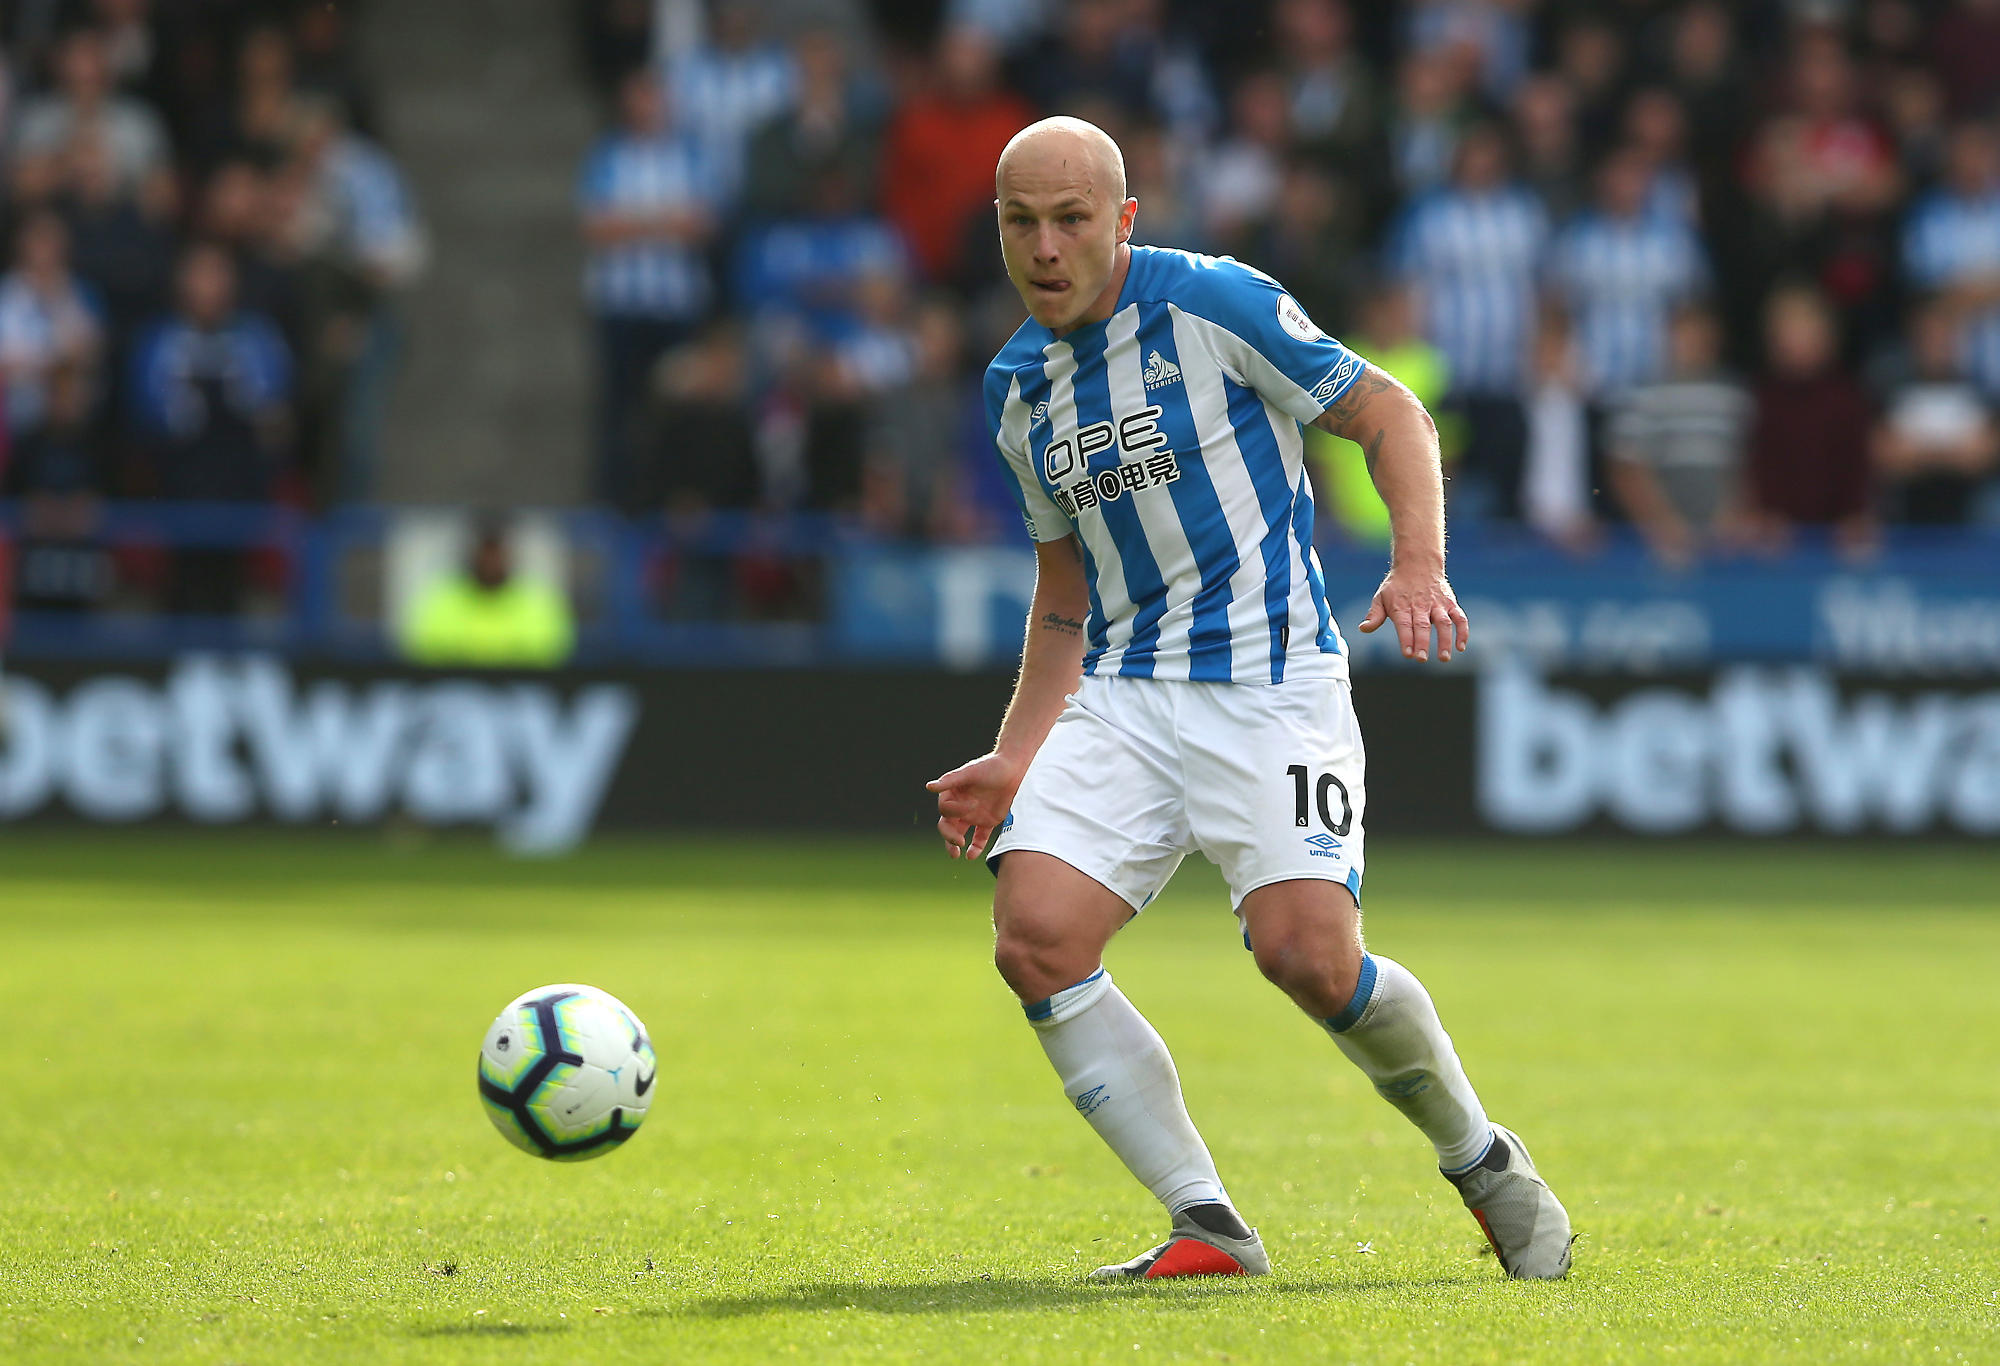 Huddersfield Town's Aaron Mooy during the Premier League match between Huddersfield Town and Crystal Palace.